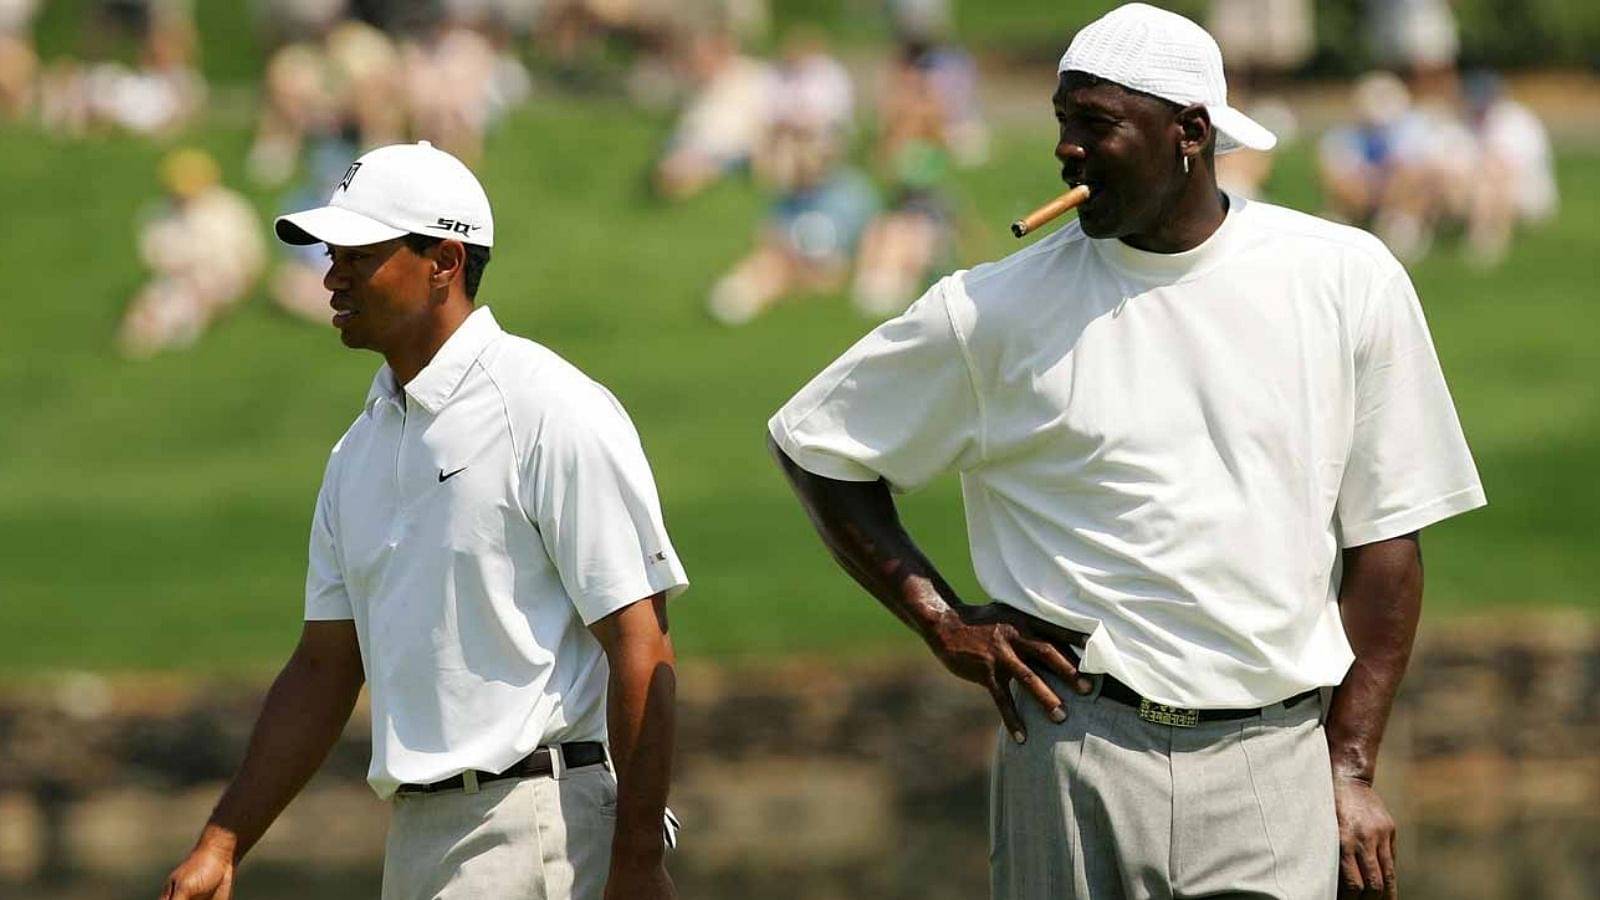 "Michael Jordan and Tiger Woods are the people I met who make people lose their f***ing mind”: When Charles Barkley talked about the crazy stardom of his Golf pals